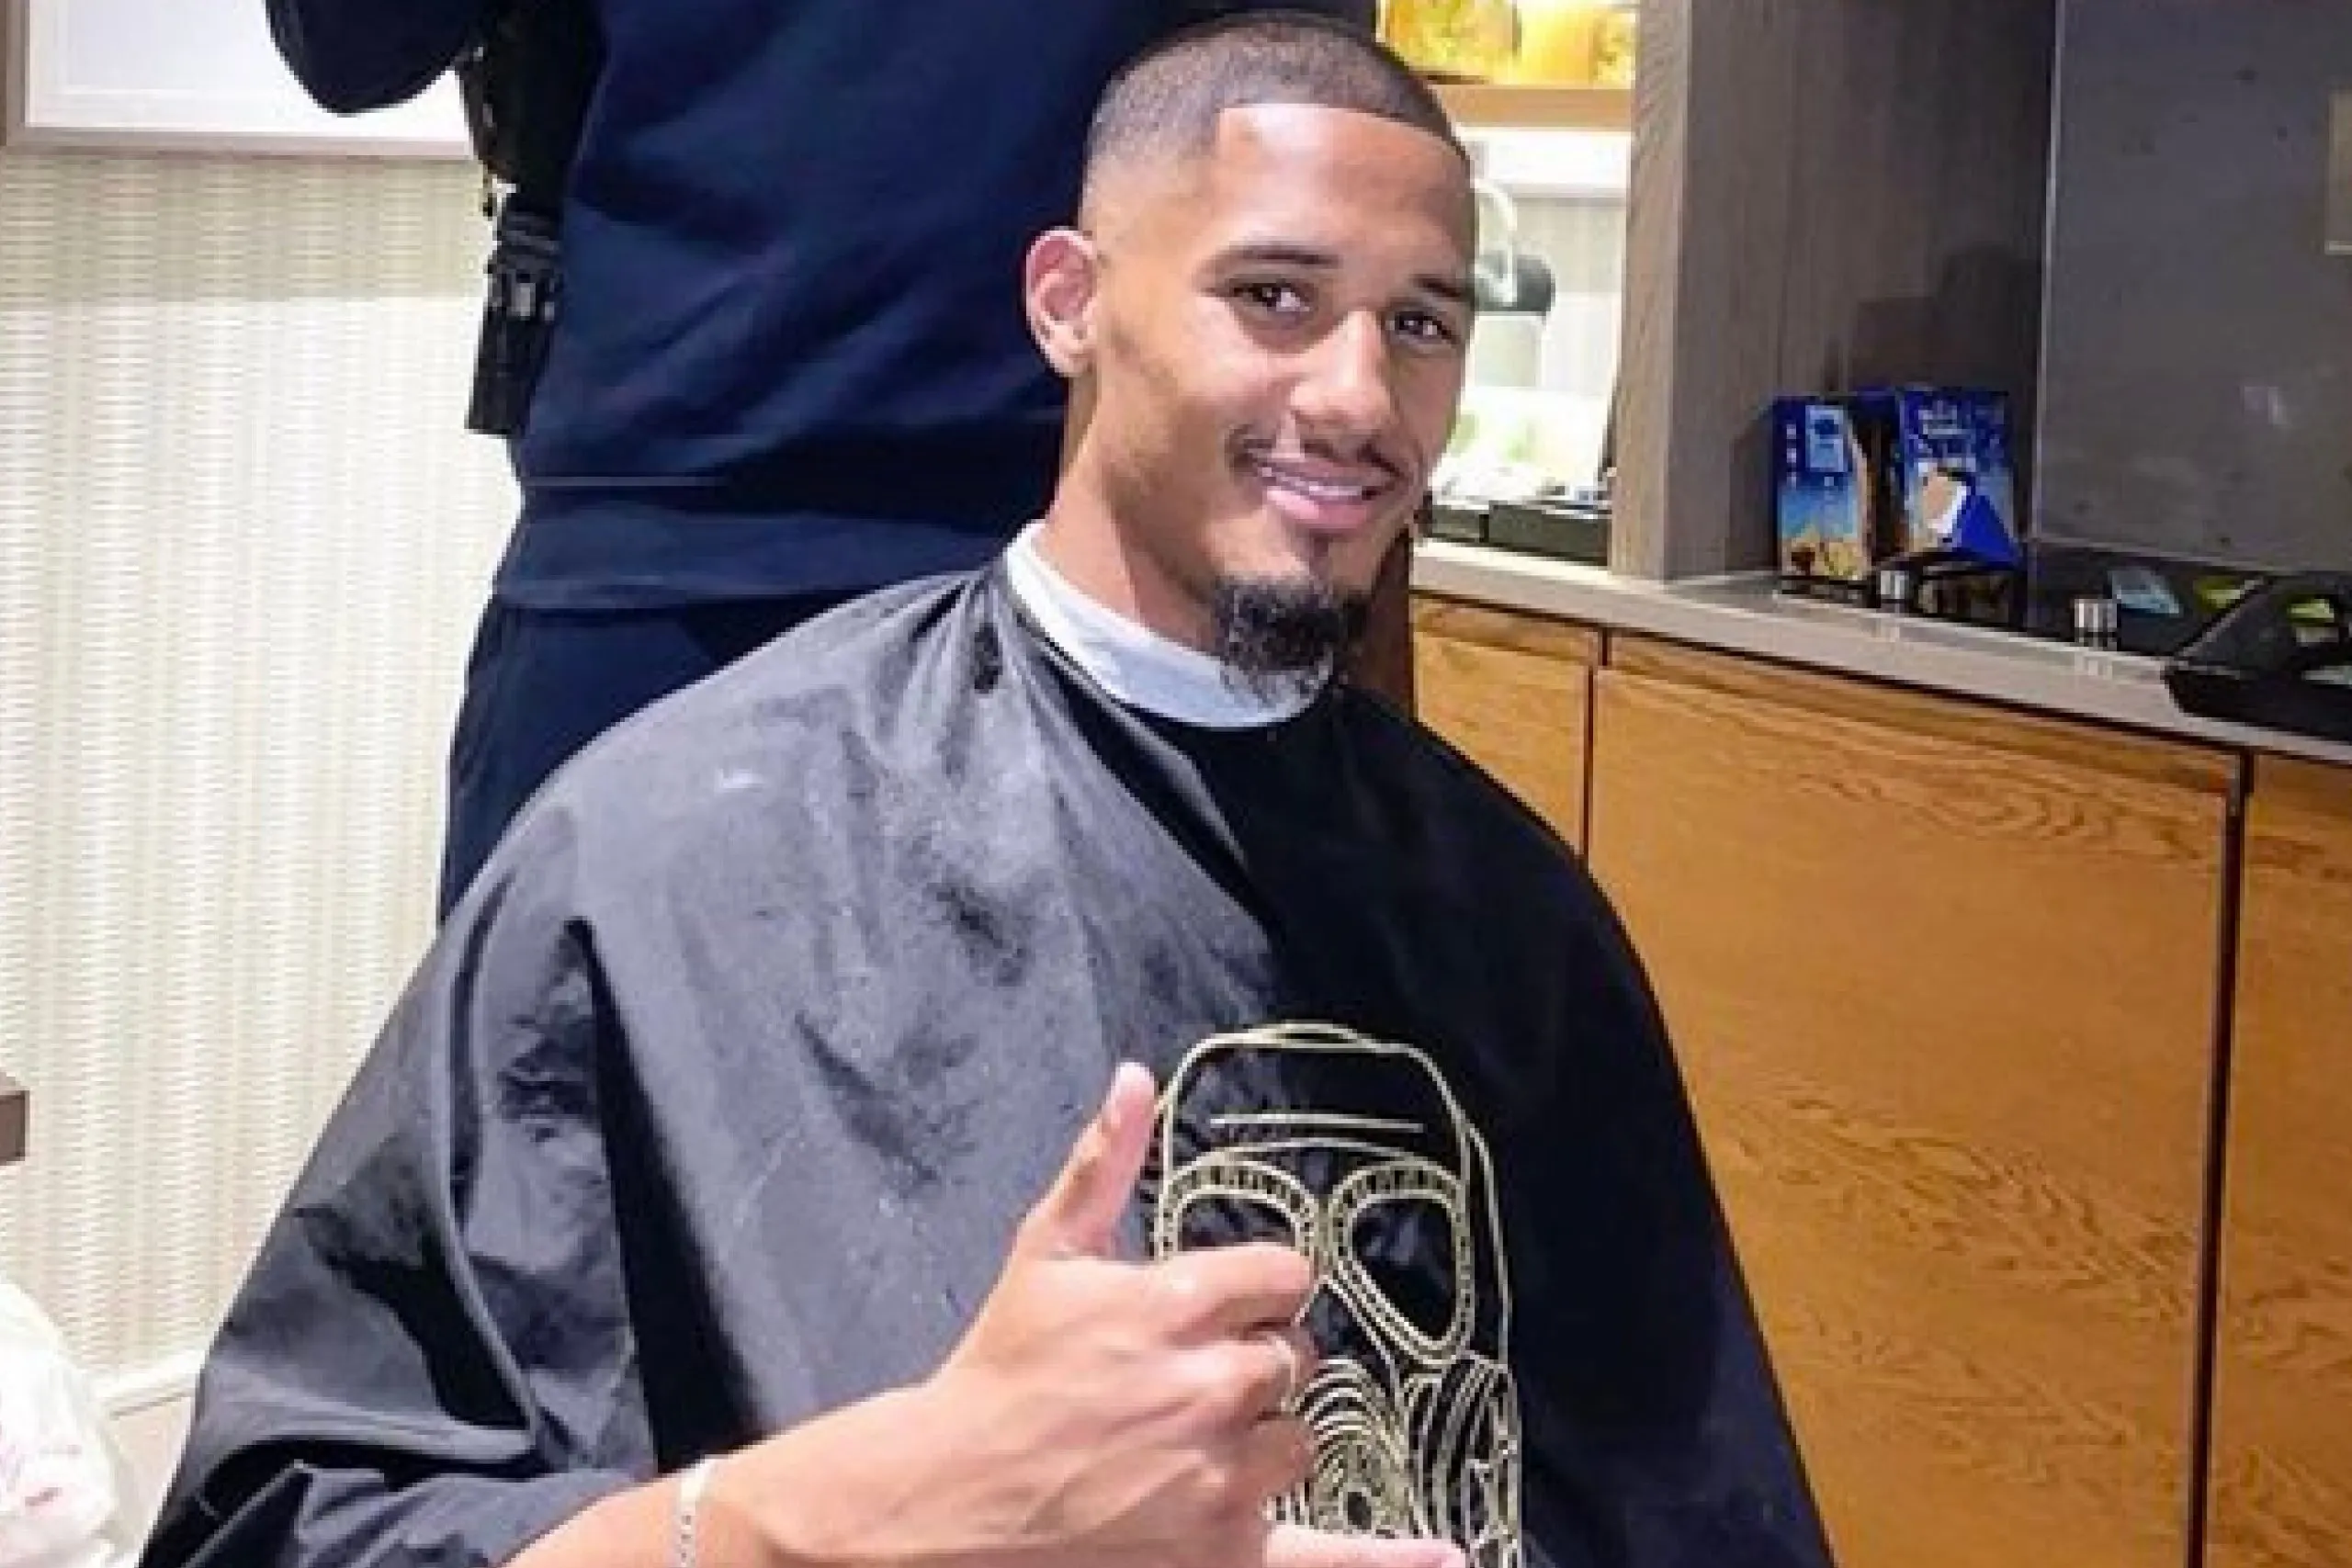 William Saliba shows off new hairstyle